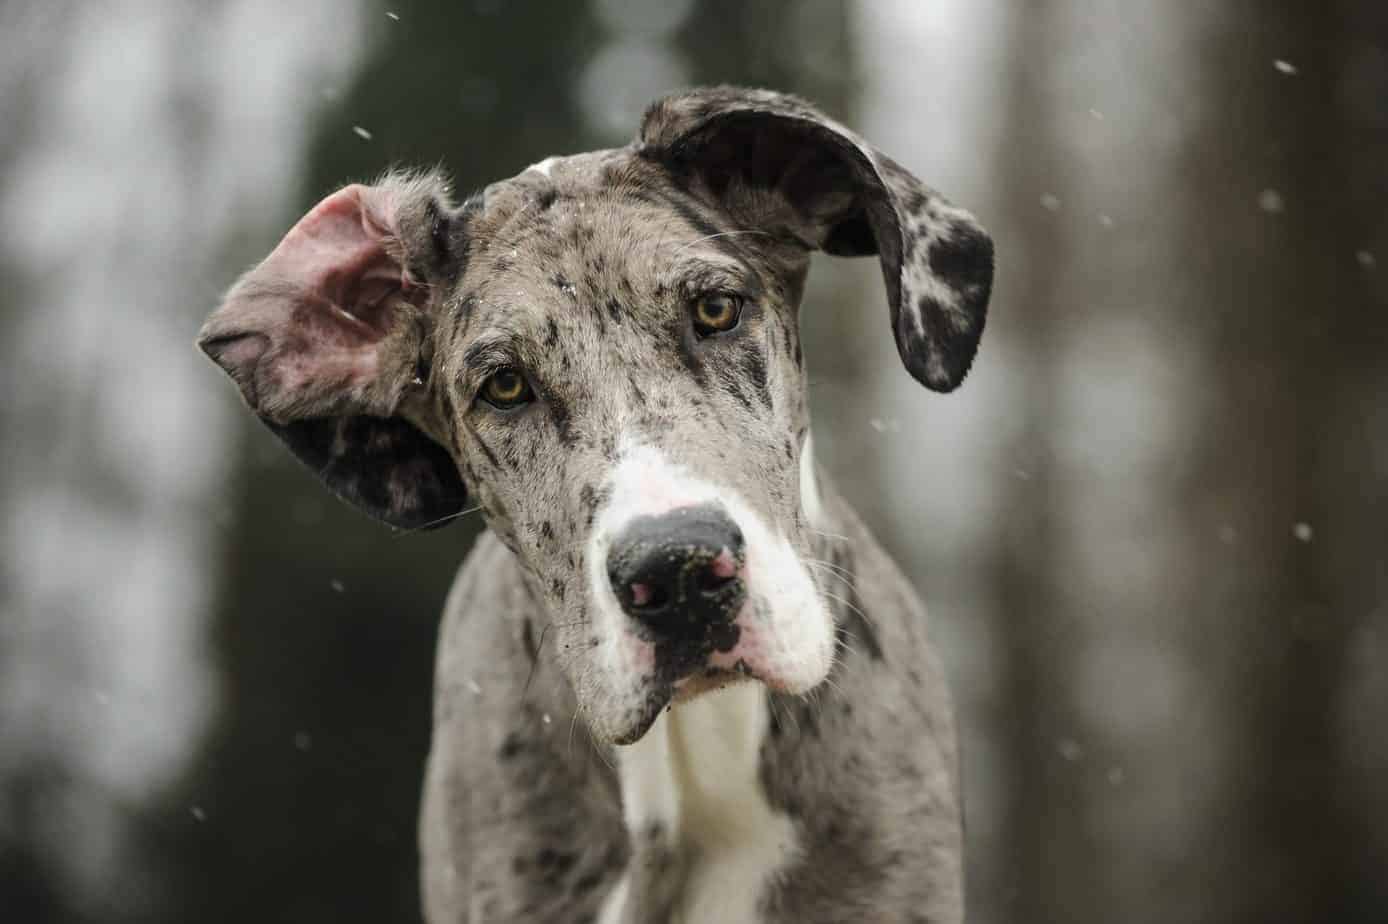 Great Dane puppy tilts his head in confusion. Large dogs have big needs. These gentle giants need lots of food and exercise, and they need to be trained early.